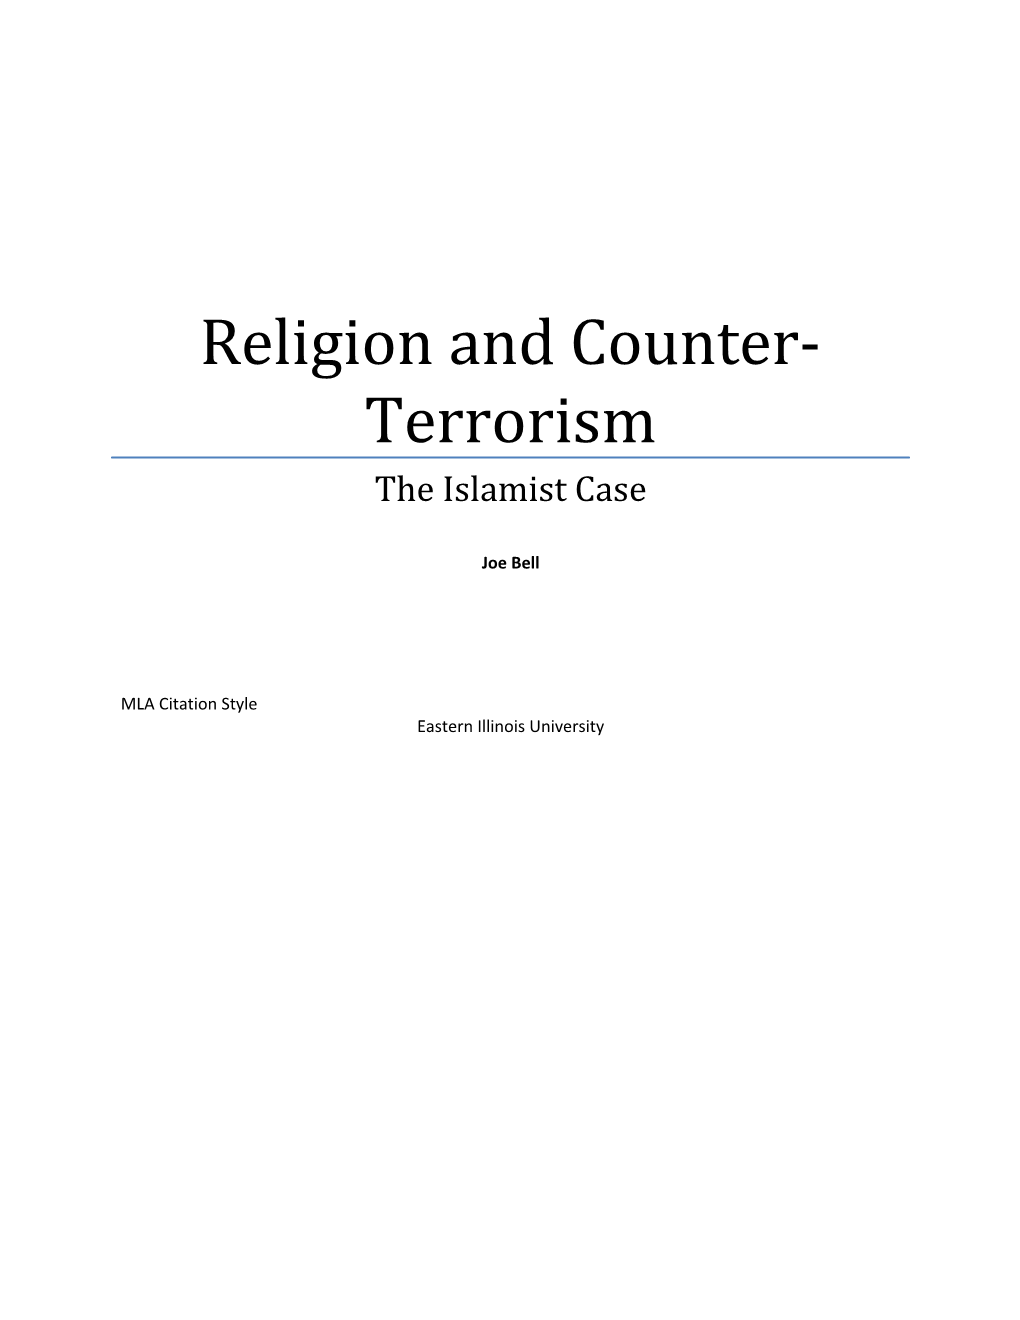 Religion and Counter-Terrorism